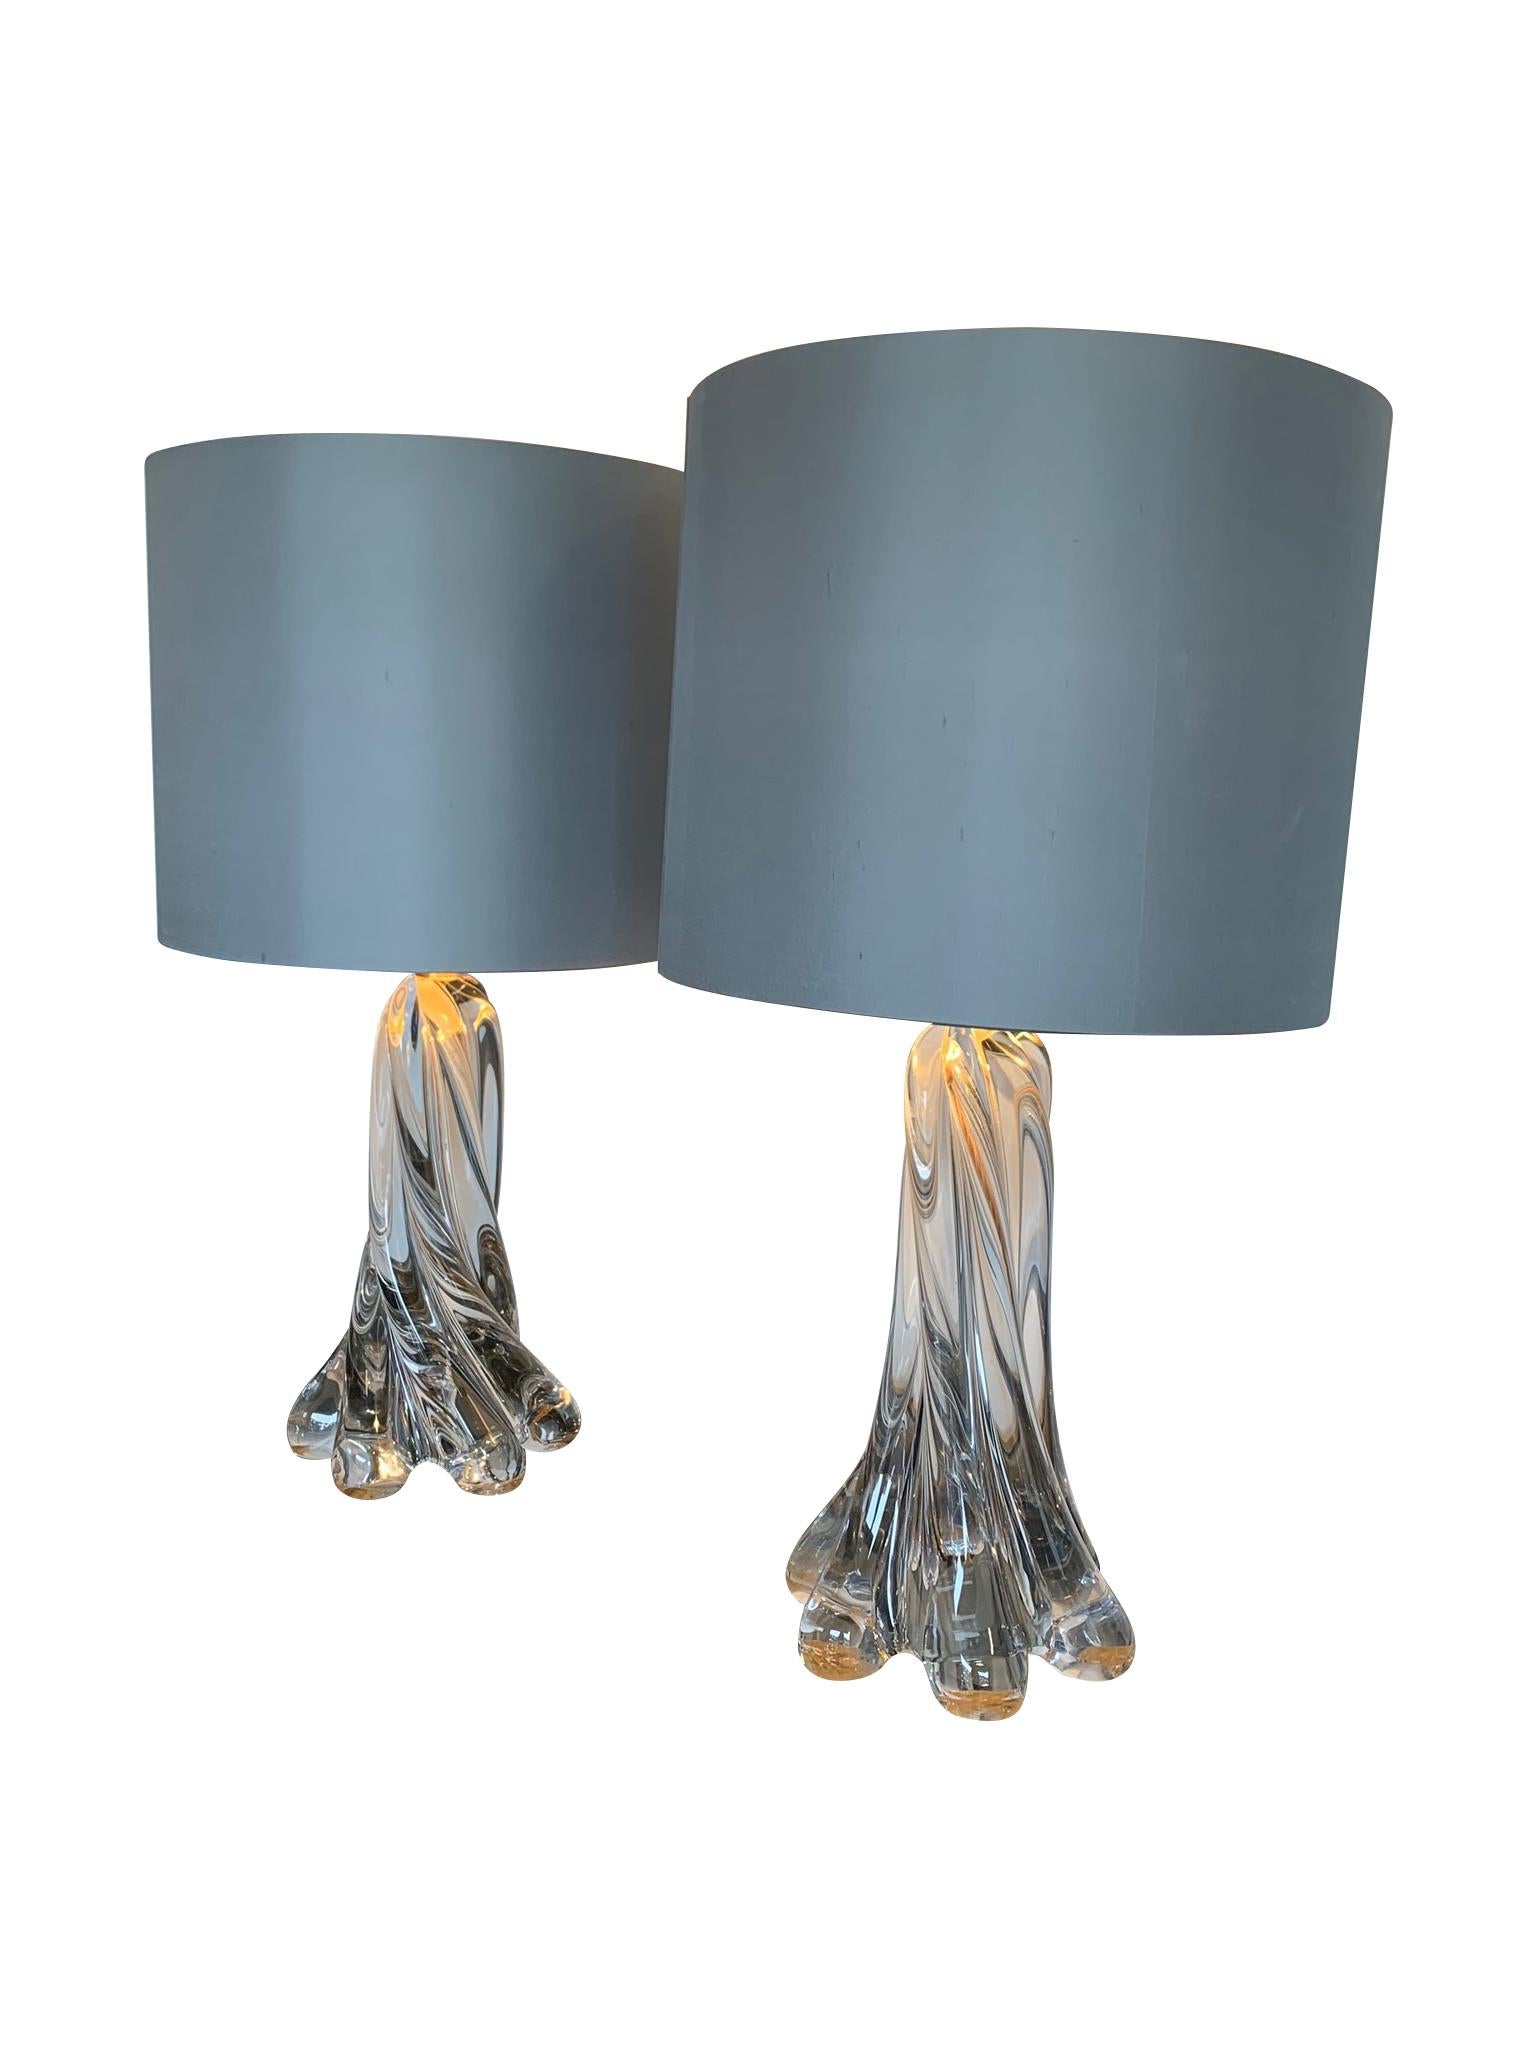 A pair of 1960s Val St Lambert clear glass lamps with bespoke slate colored shades.